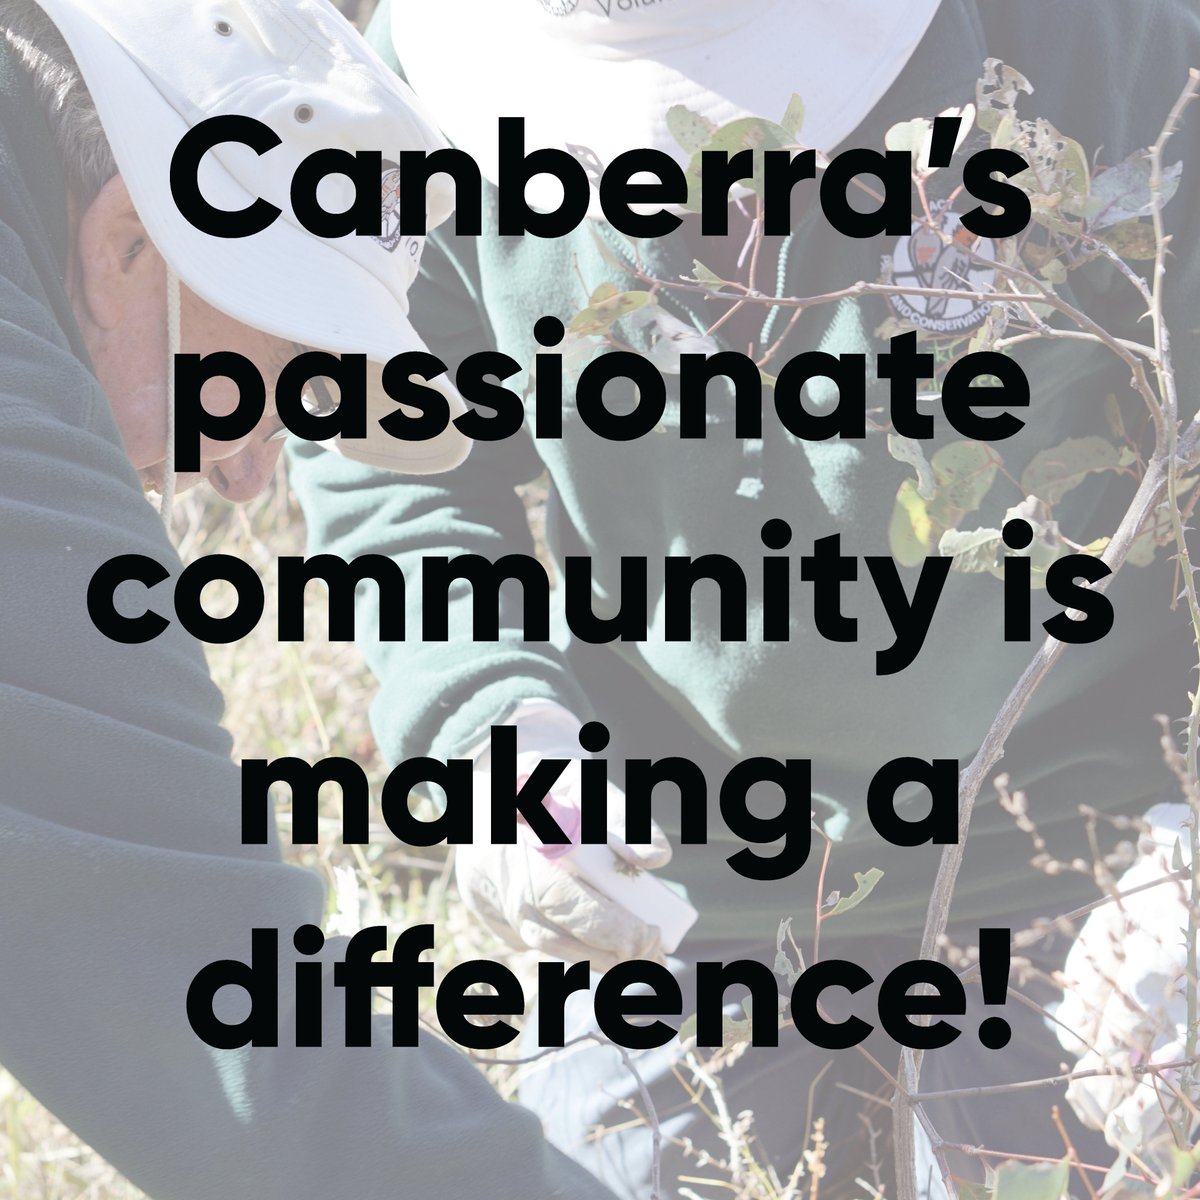 The ACT has over 6,000 environmental volunteers, including 3,000 citizen scientists across more than 90 volunteer groups. Read about the work Canberrans are doing actsoe2023.com.au/issues/communi…